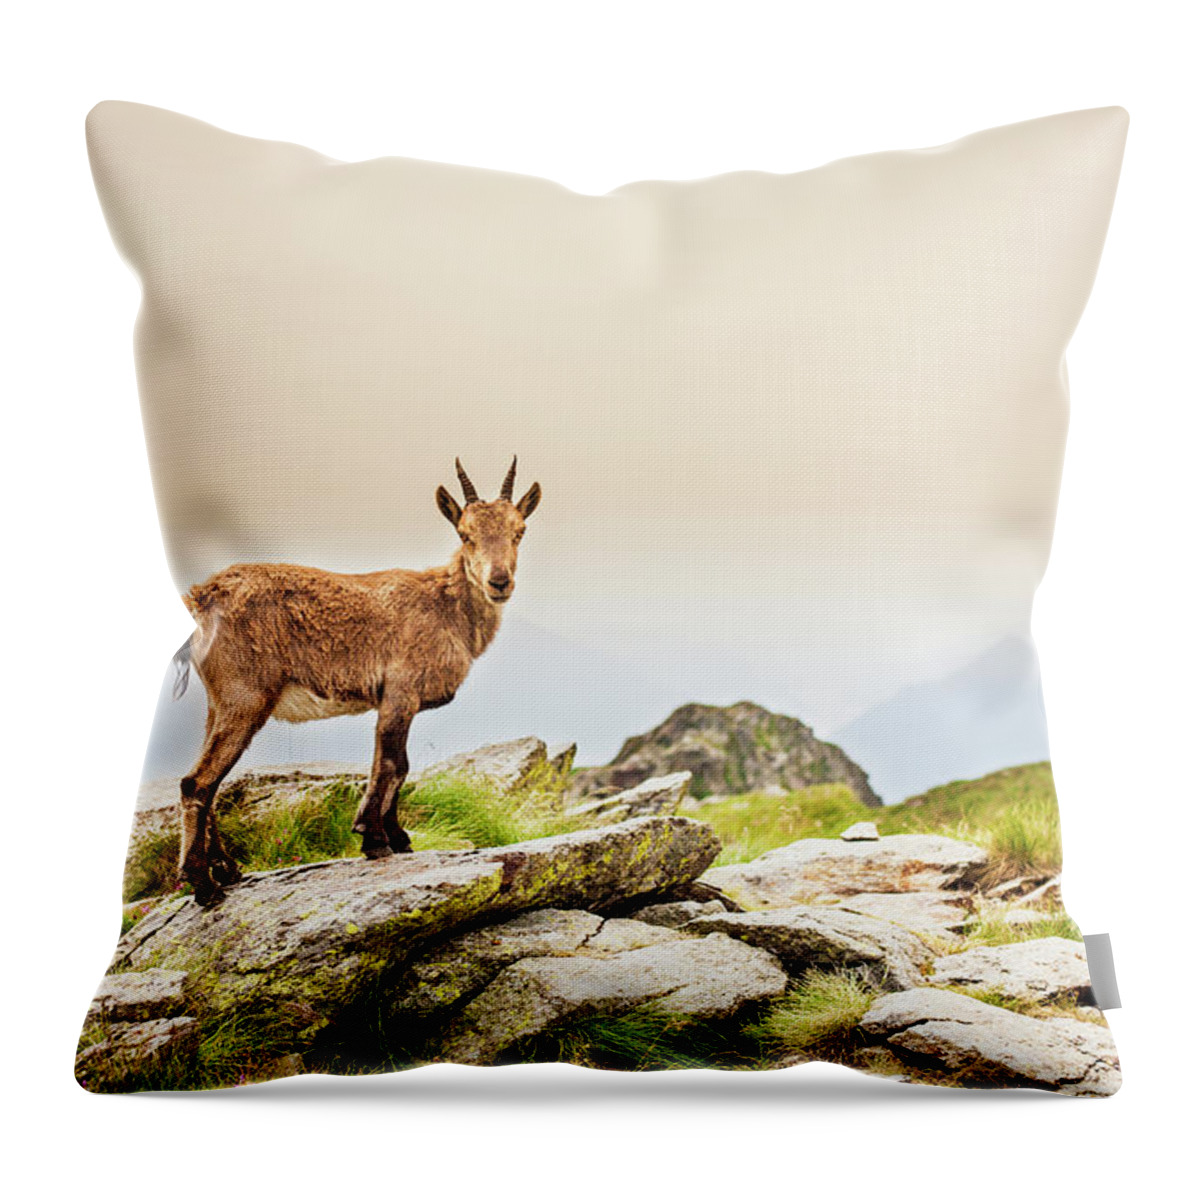 Horned Throw Pillow featuring the photograph Young Ibex Alpine On The Mountain by Deimagine